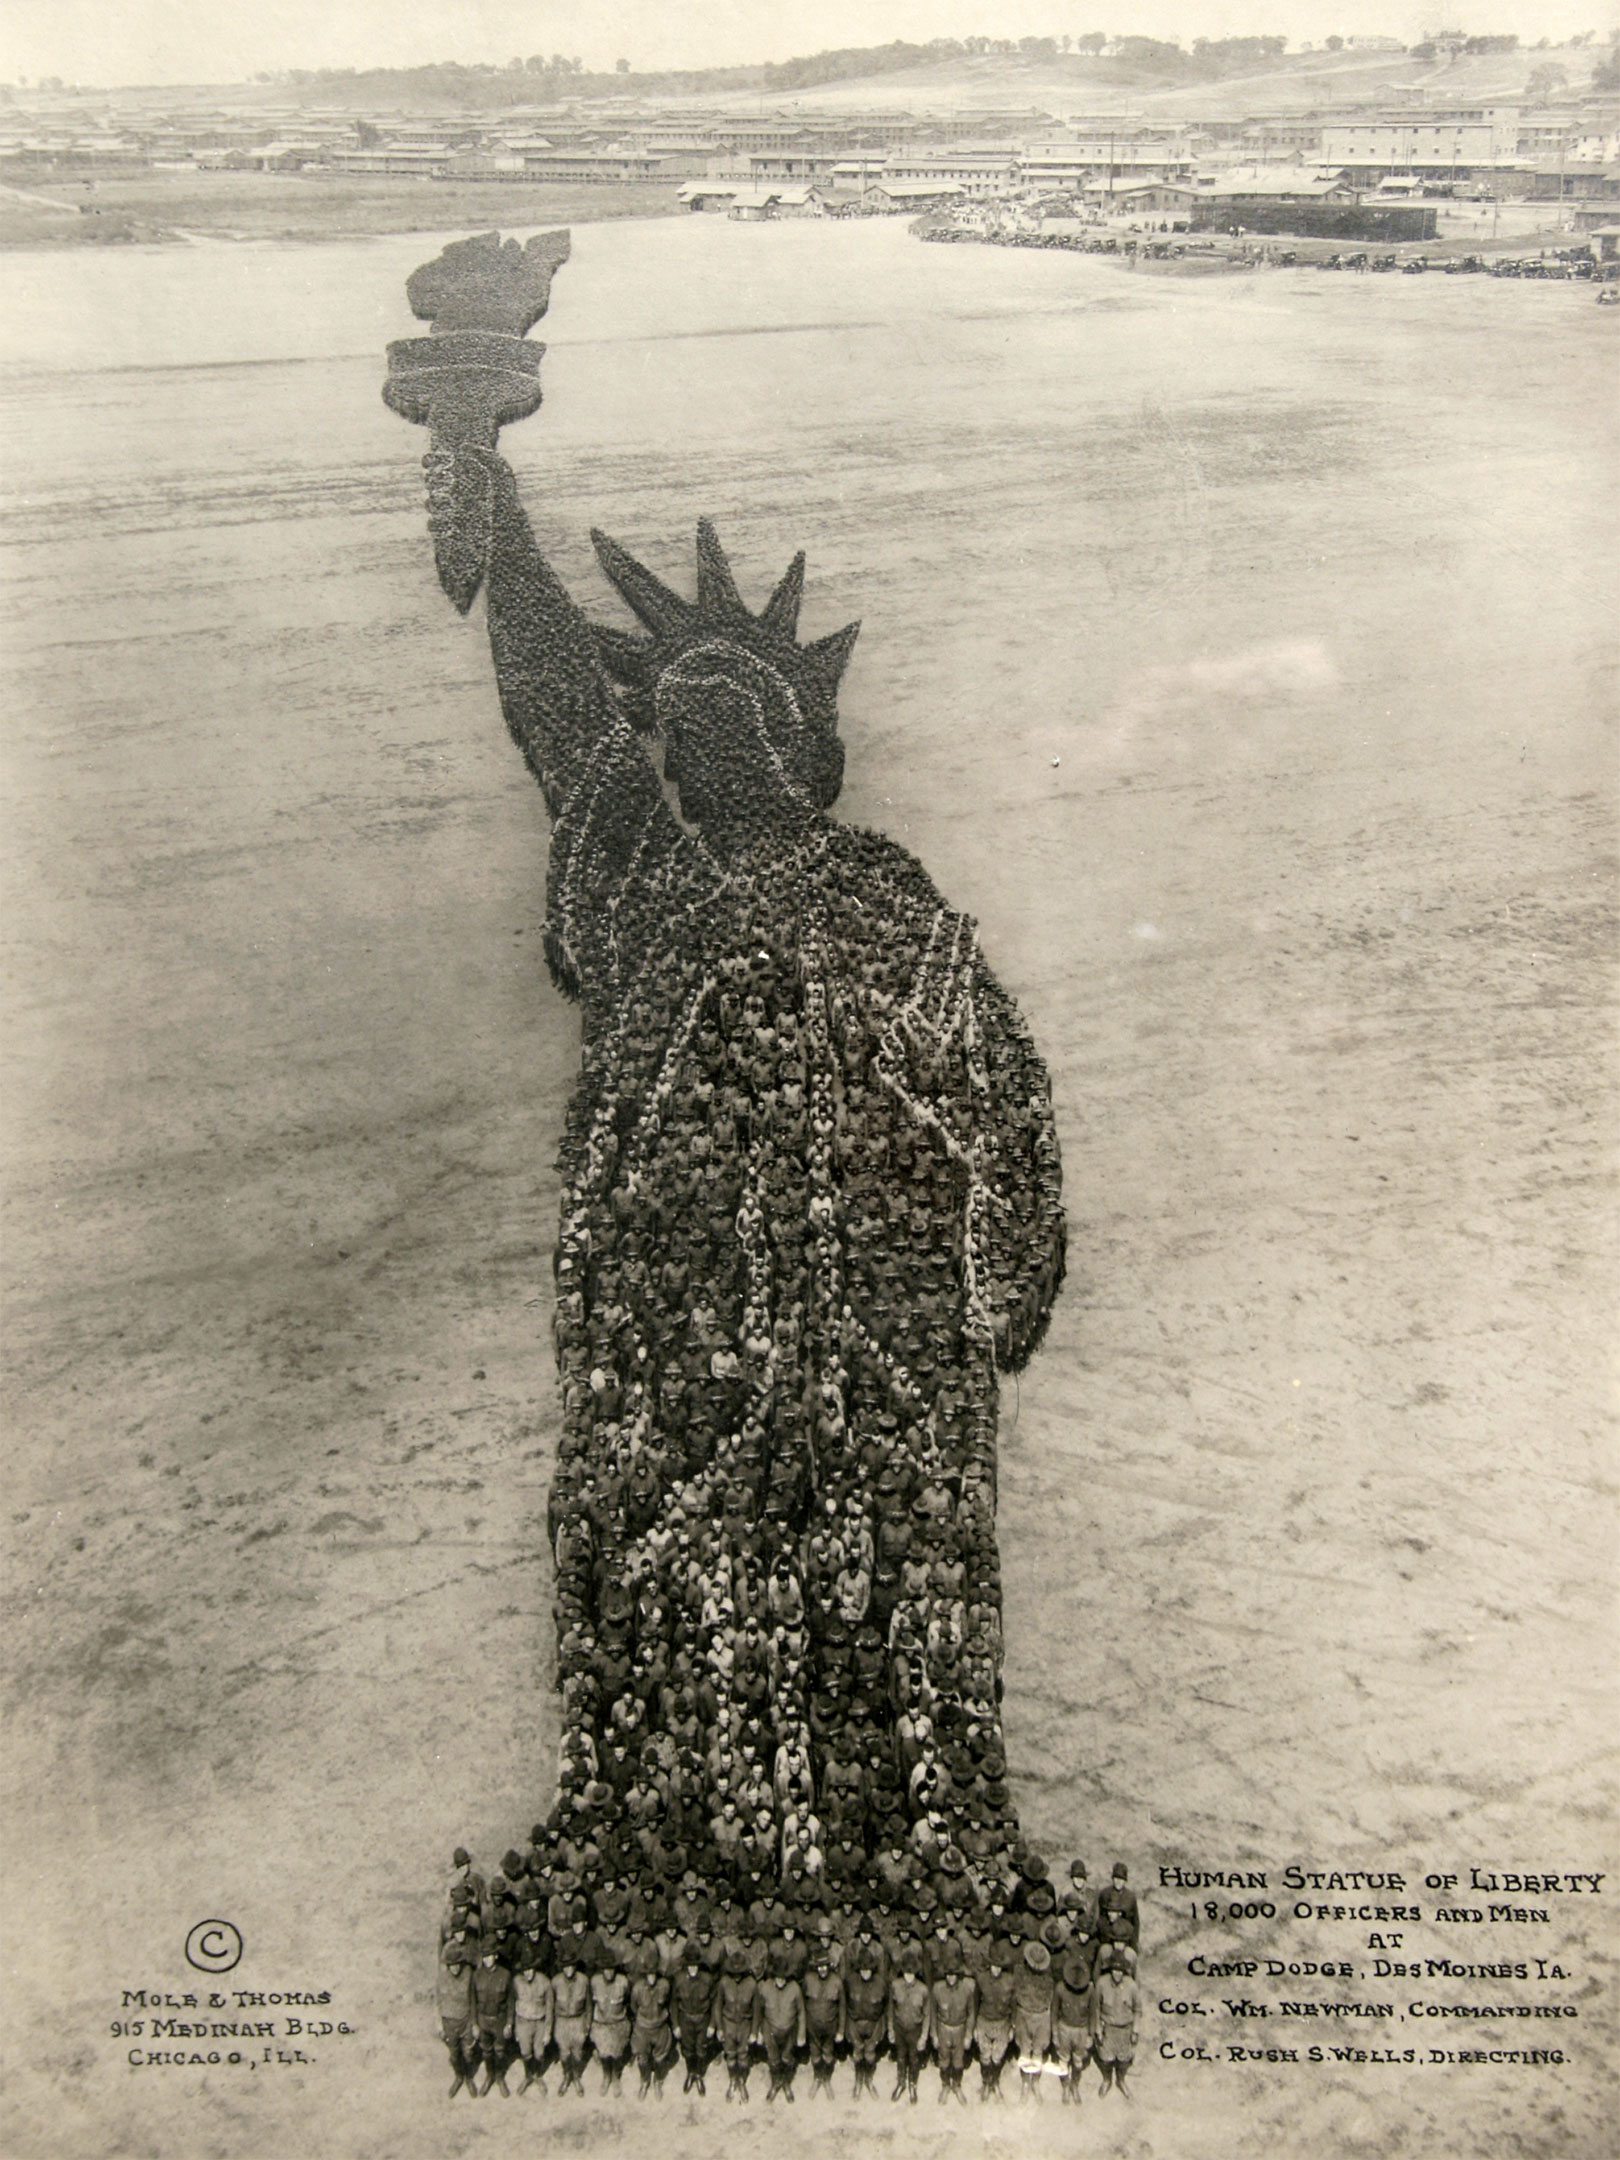 Mole & Thomas ‘Human Statue of Liberty’ photograph formed by 18,000 officers and enlisted men at Camp Dodge, Des Moines, Iowa. Ross Art Group image.